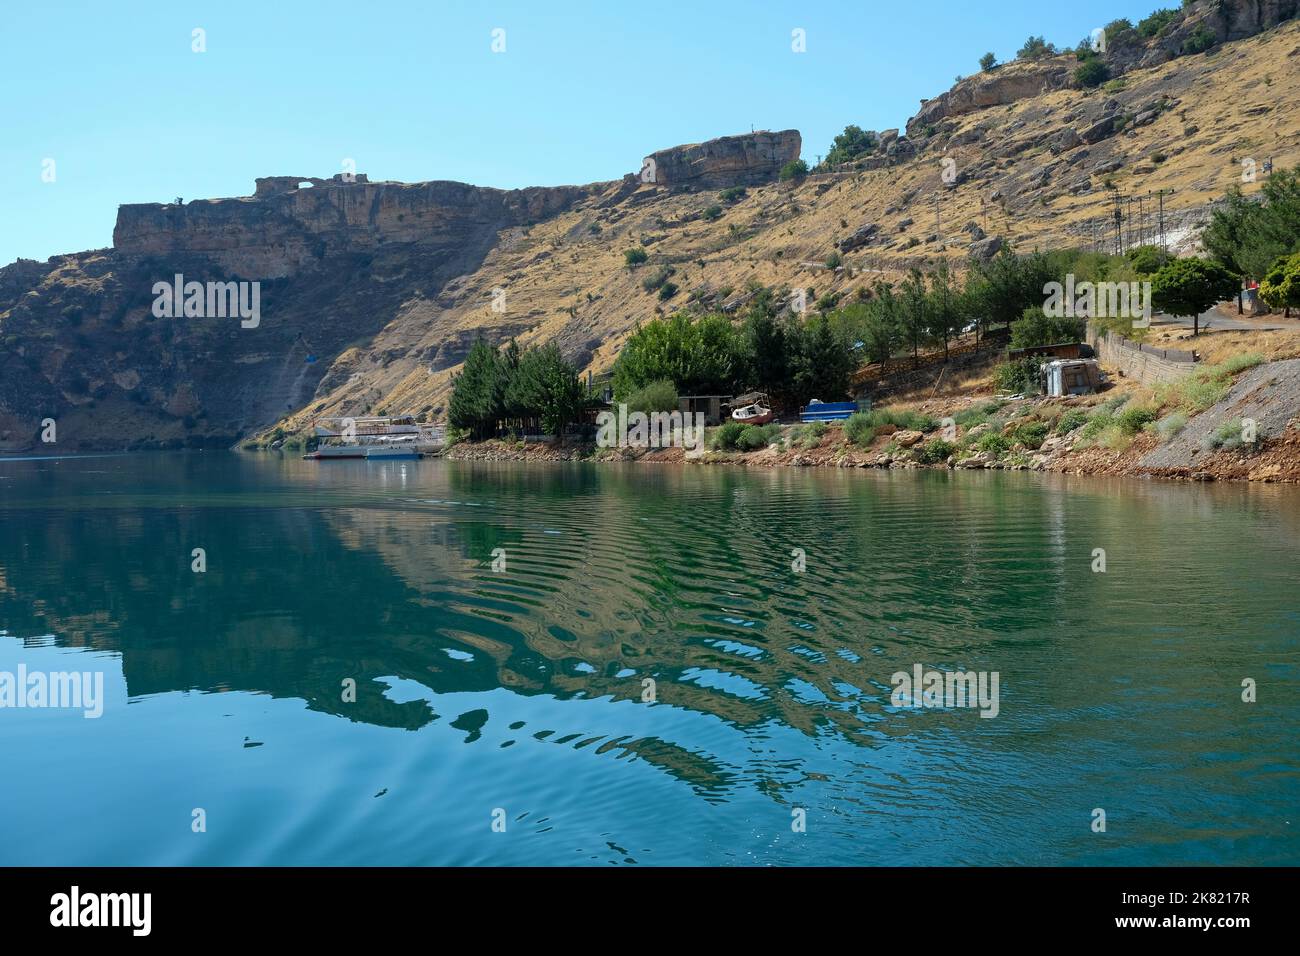 A view from the dam lake located in Eğil district of Diyarbakır province. Stock Photo